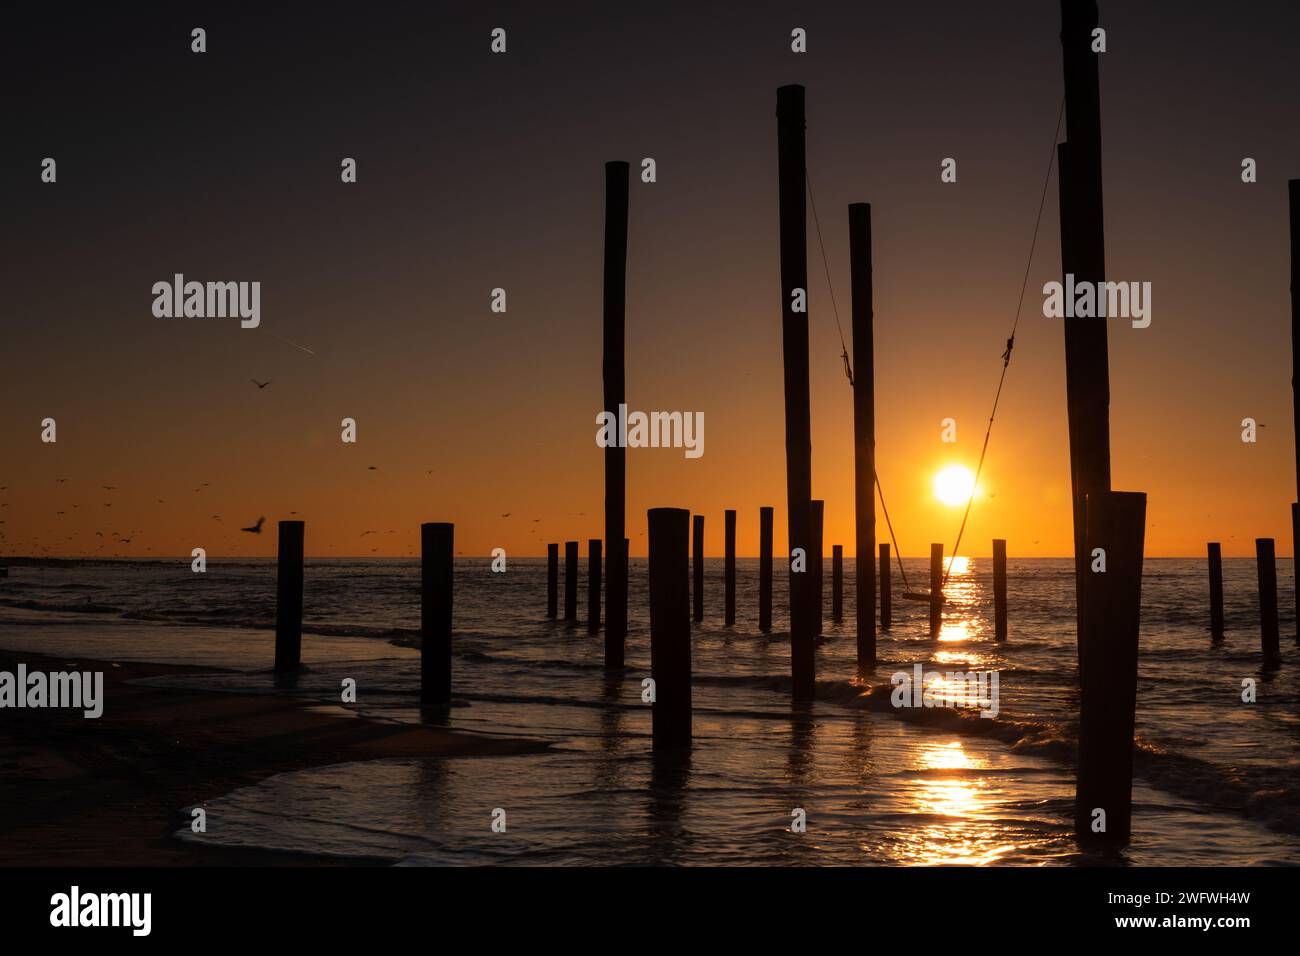 Monumental wooden poles, including a swing set, in the sea during a lovely sunset in the Netherlands Stock Photo